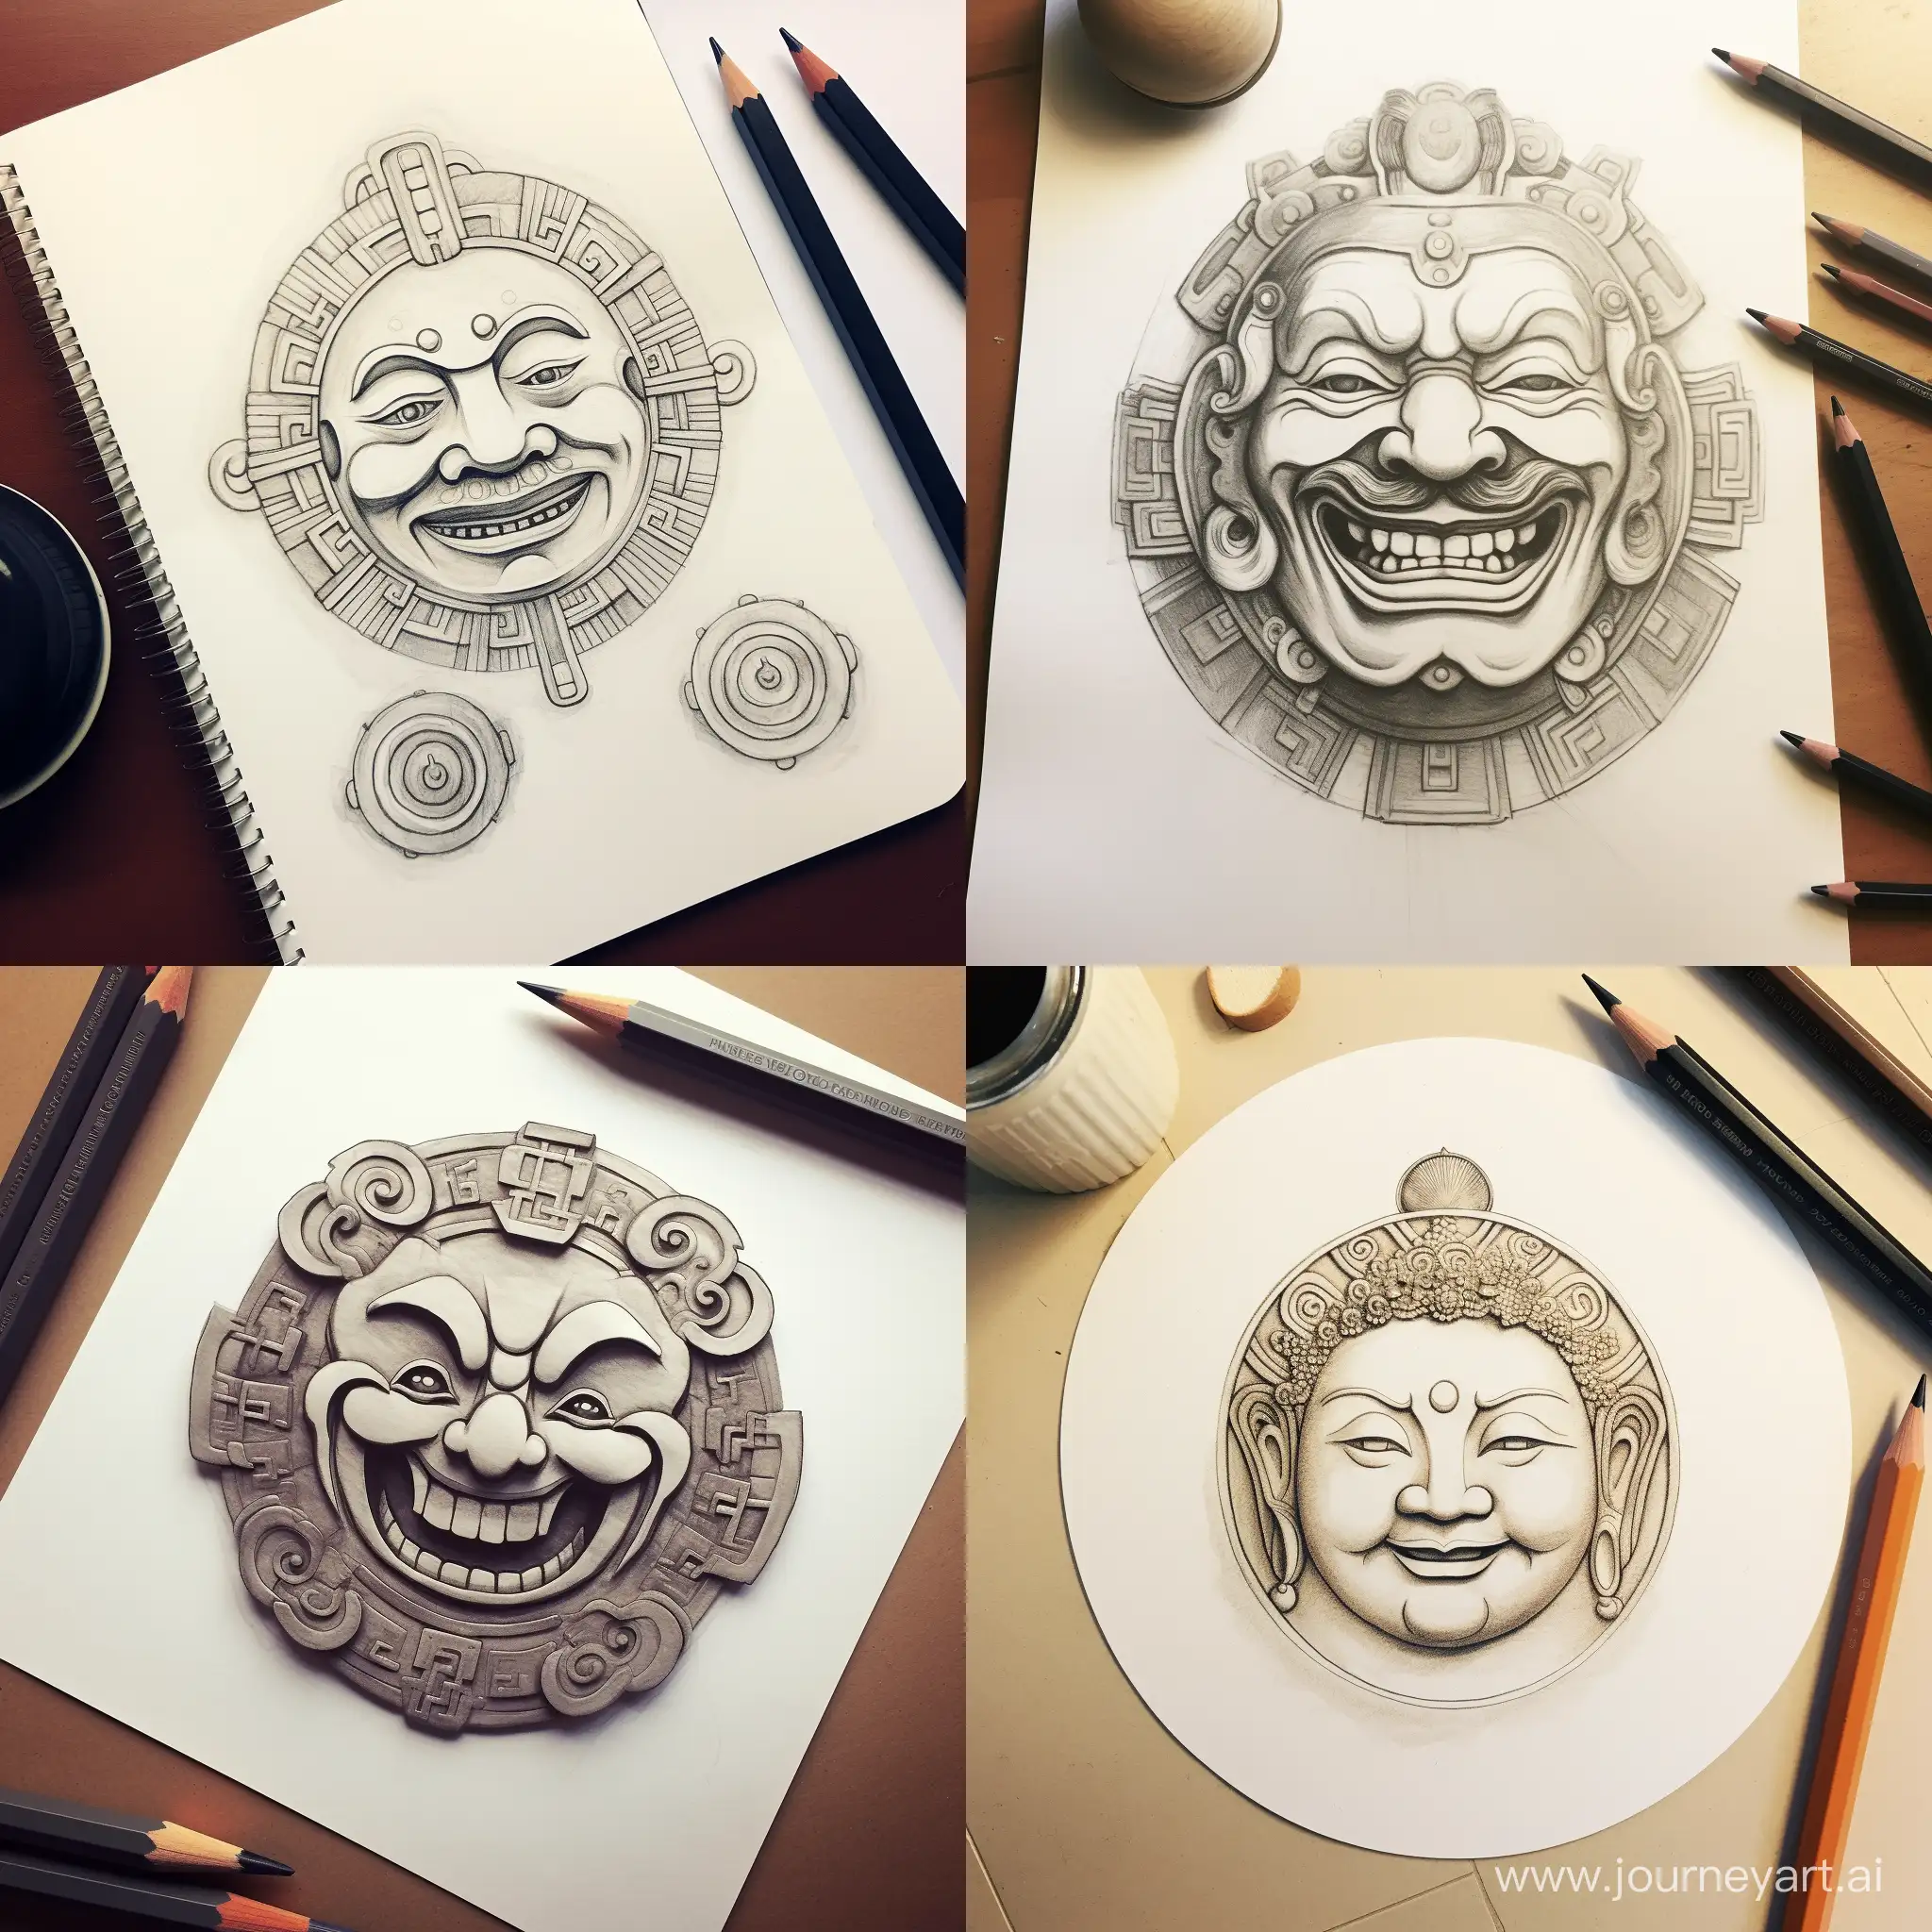 Joyful-Expression-Ancient-Chinese-Coins-Forming-a-Smiling-Face